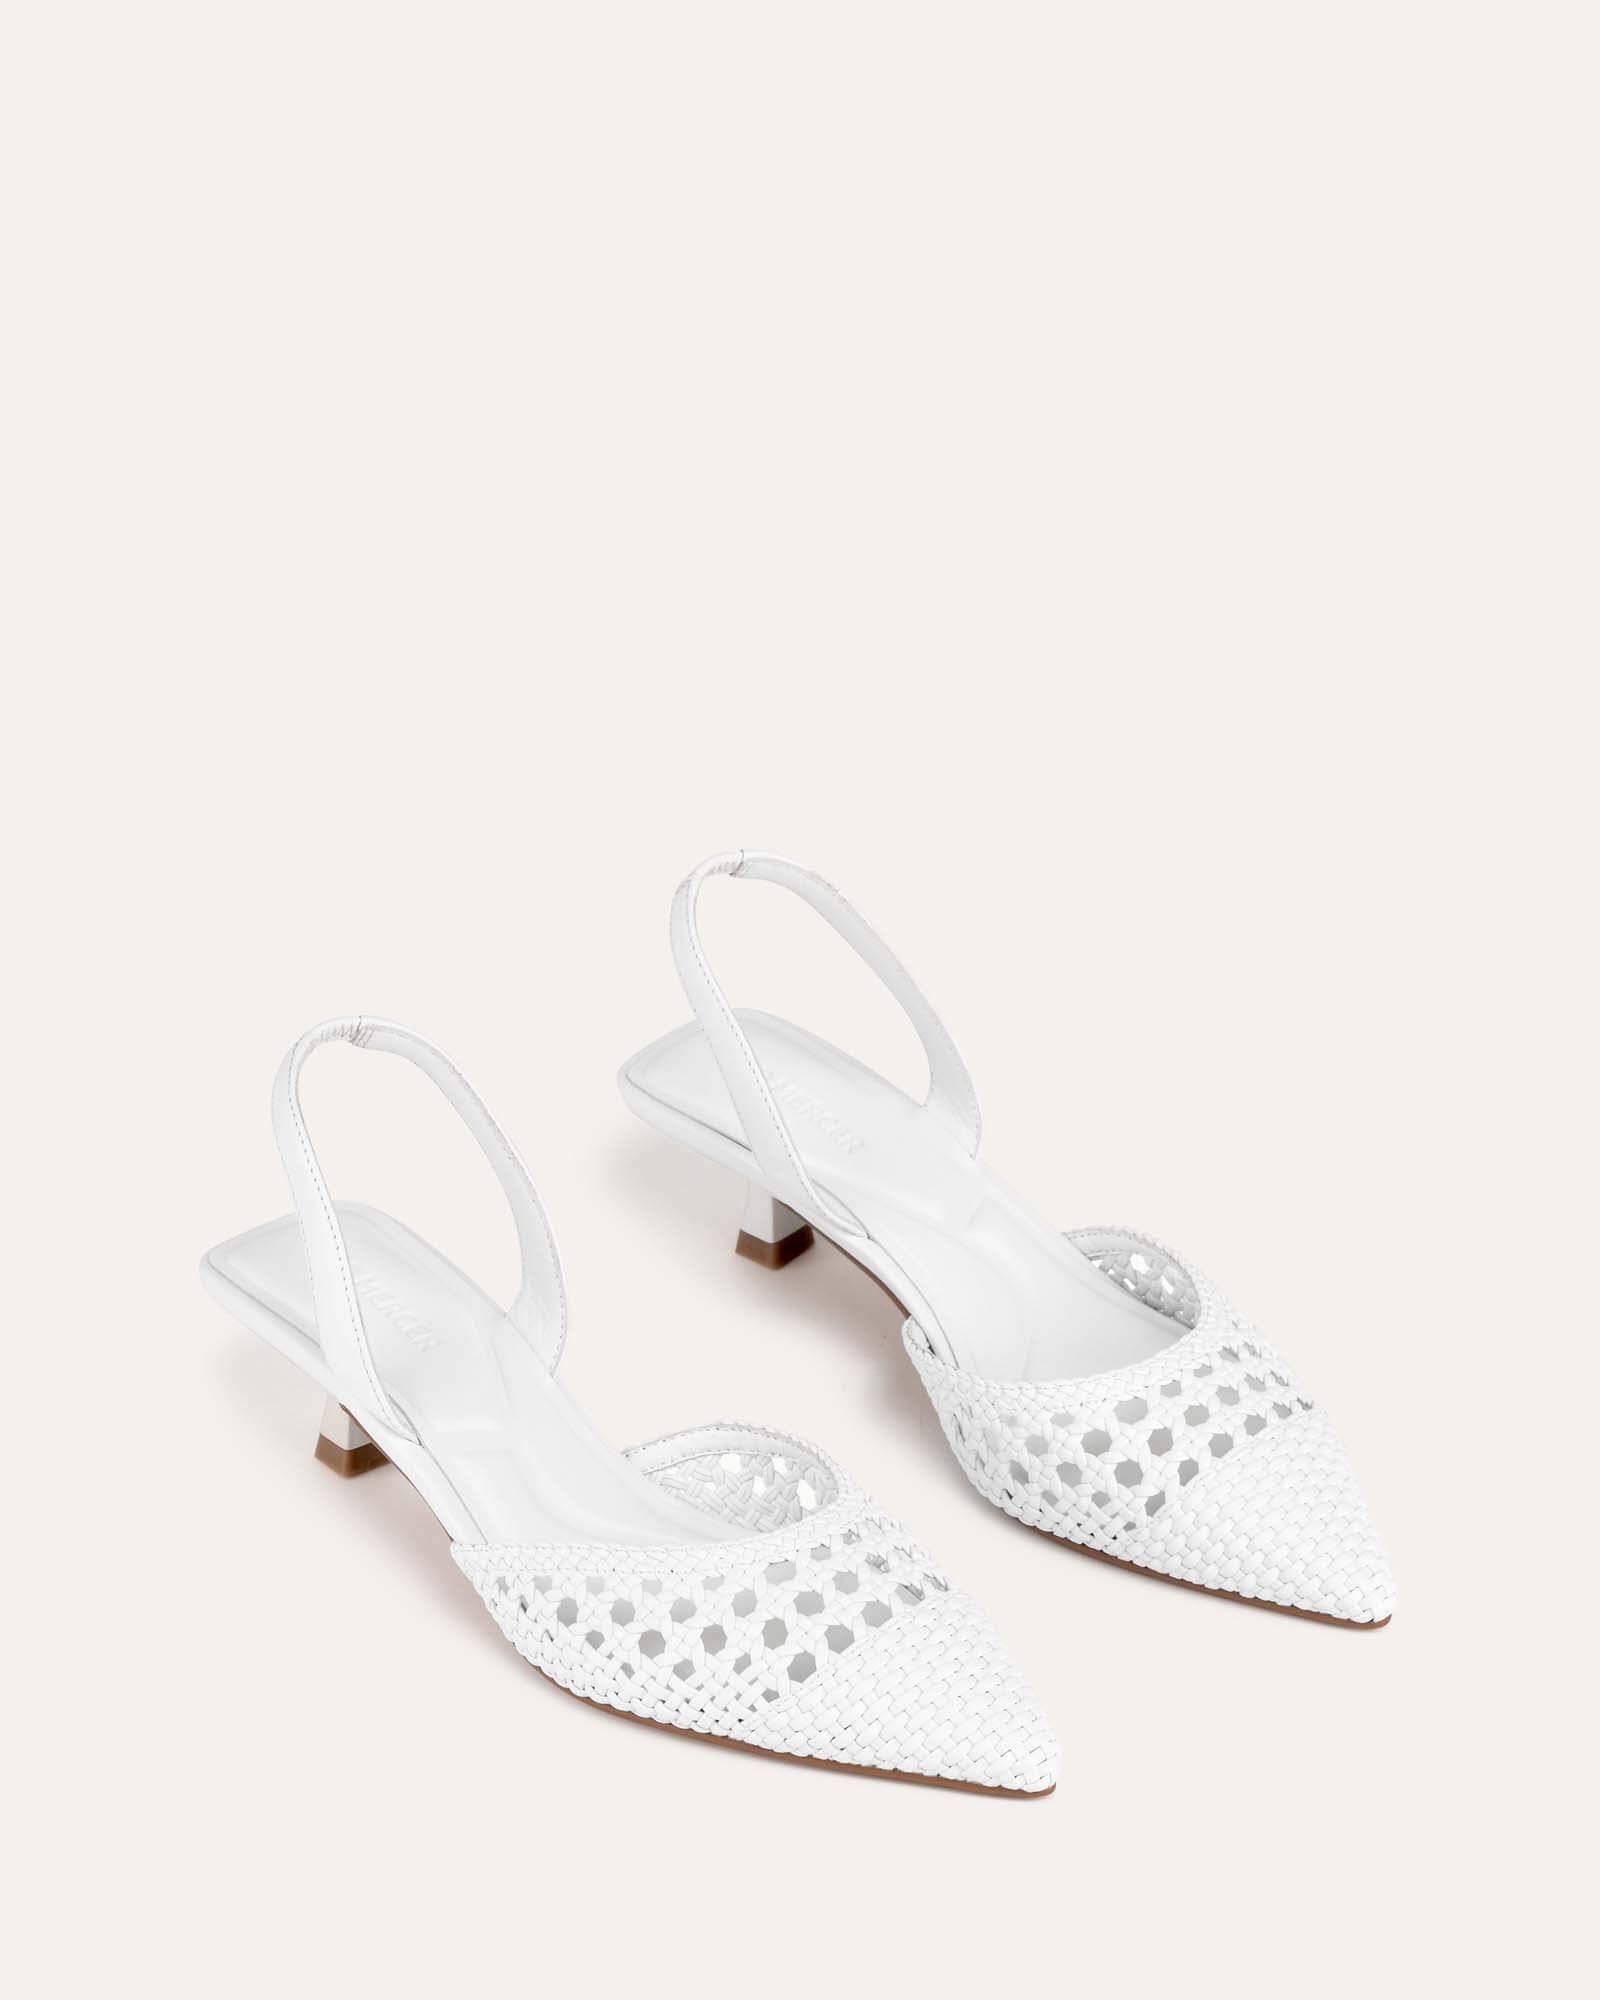 SLINGPOINT Slingback Point Kitten Heel in White Nappa | Russell & Bromley